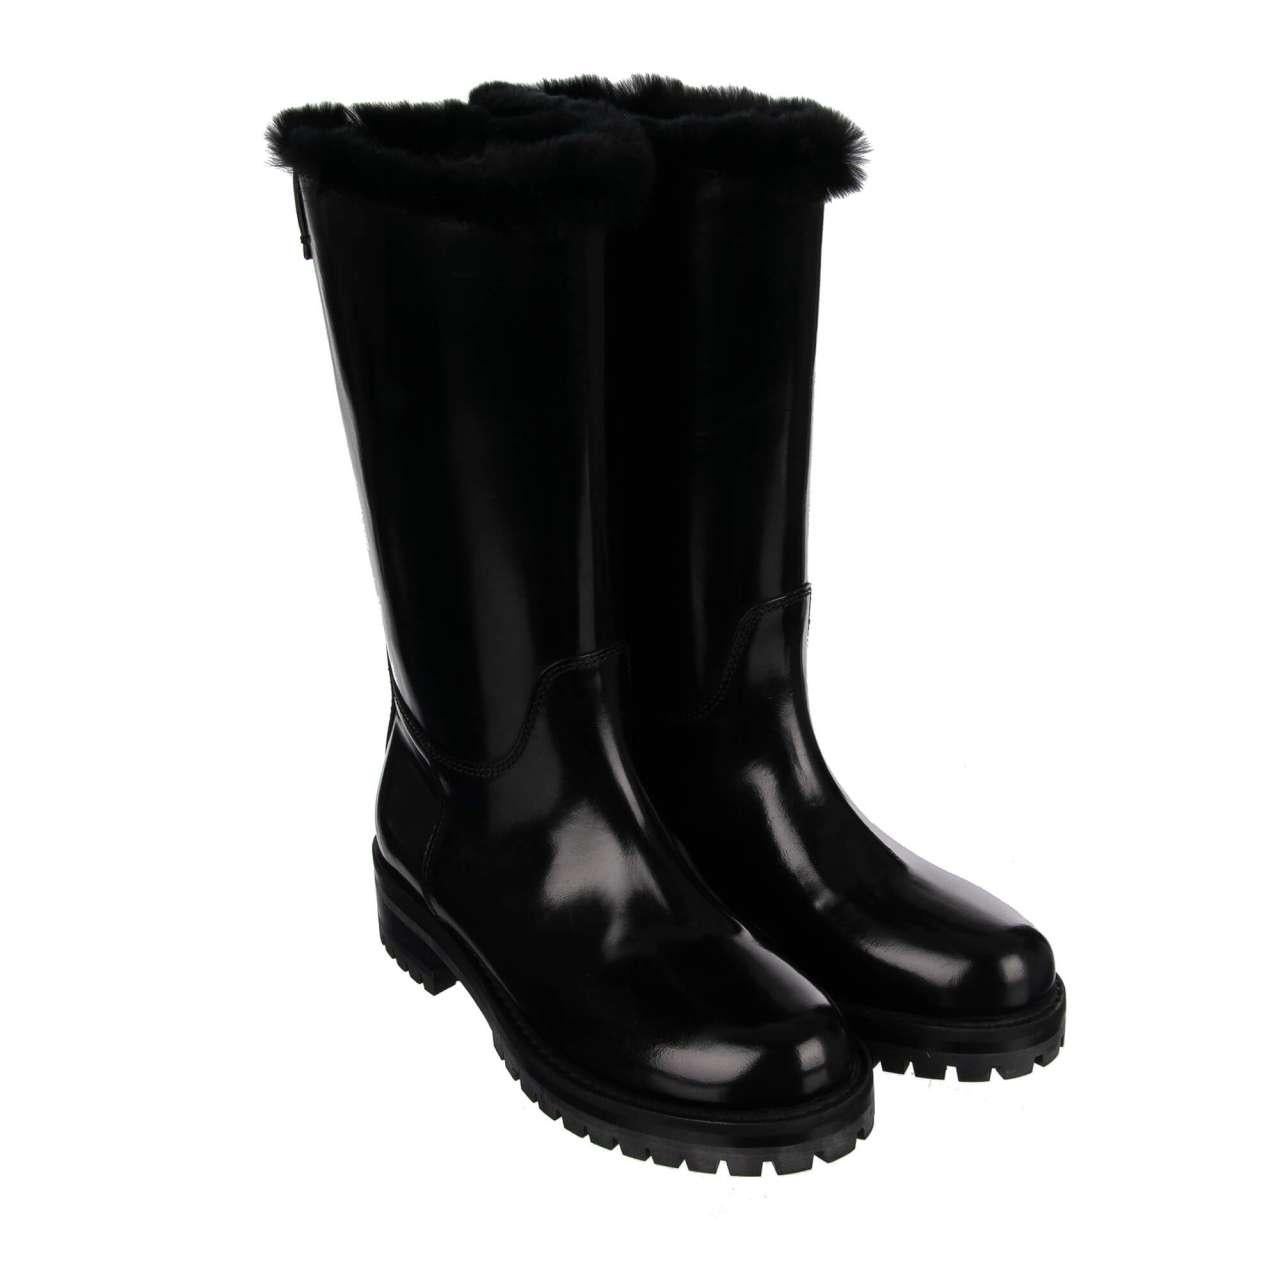 - Leather Boots BIKER with fur trim and Dolce&Gabbana logo on the back in black by DOLCE & GABBANA - MADE IN ITALY - New with Box - Model: CT0224-AB537-80999 - Material: 90% Calf leather, 10% Rabbit fur - Sole: Rubber - Color: Black - Rabbit fur